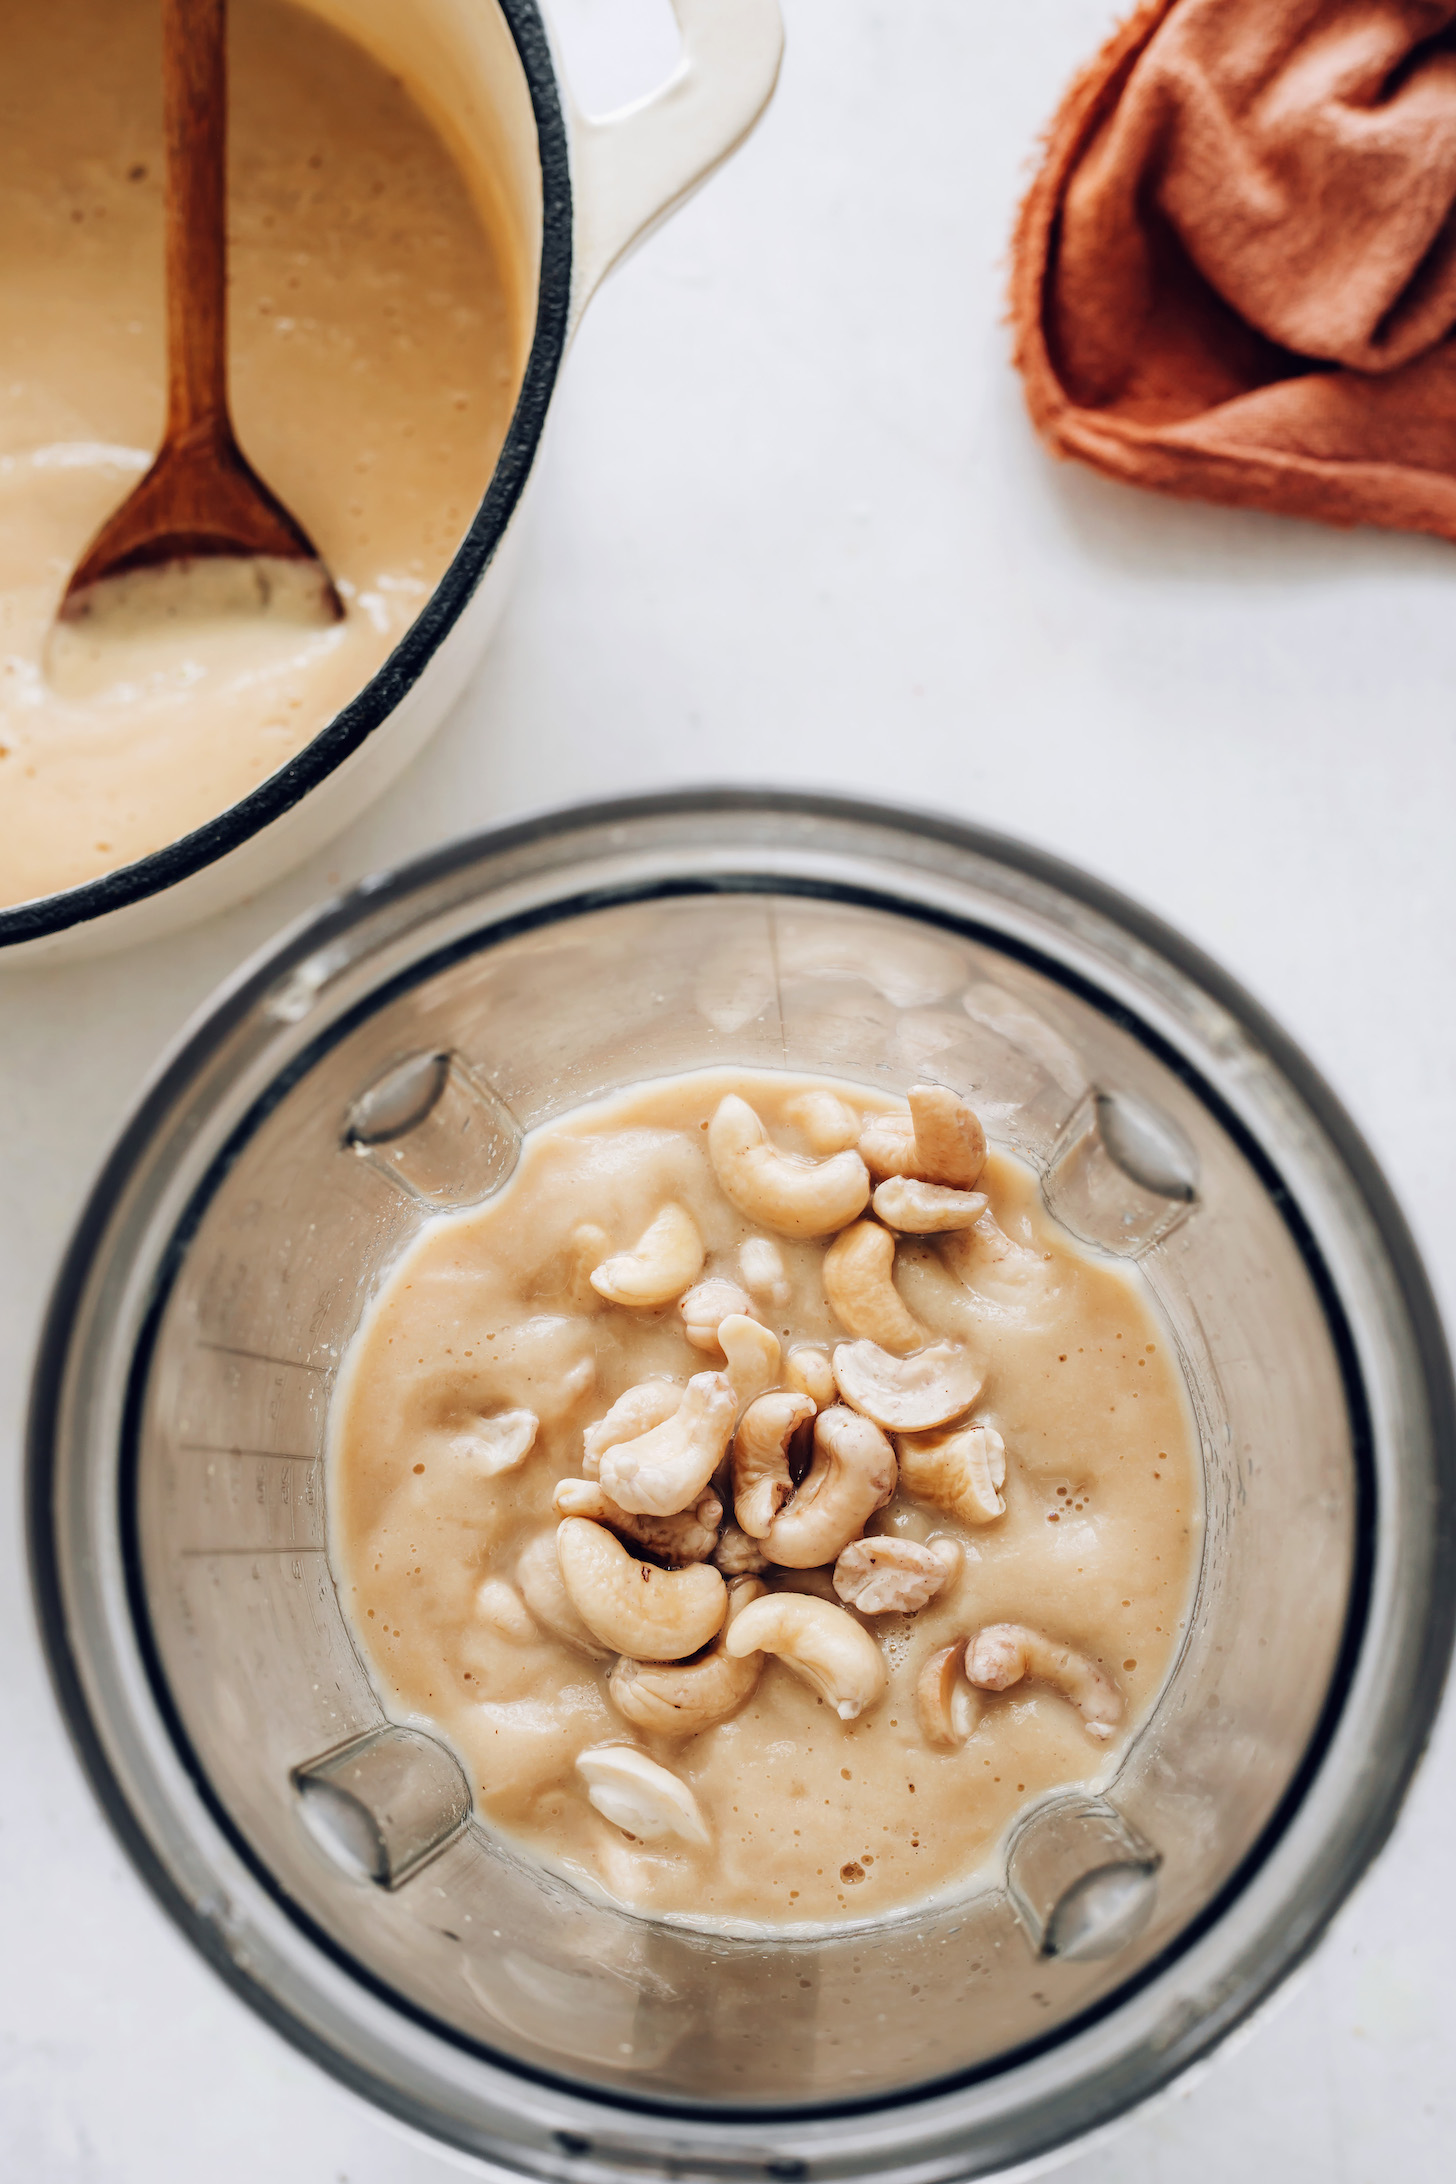 Blender with roasted cauliflower soup and cashews